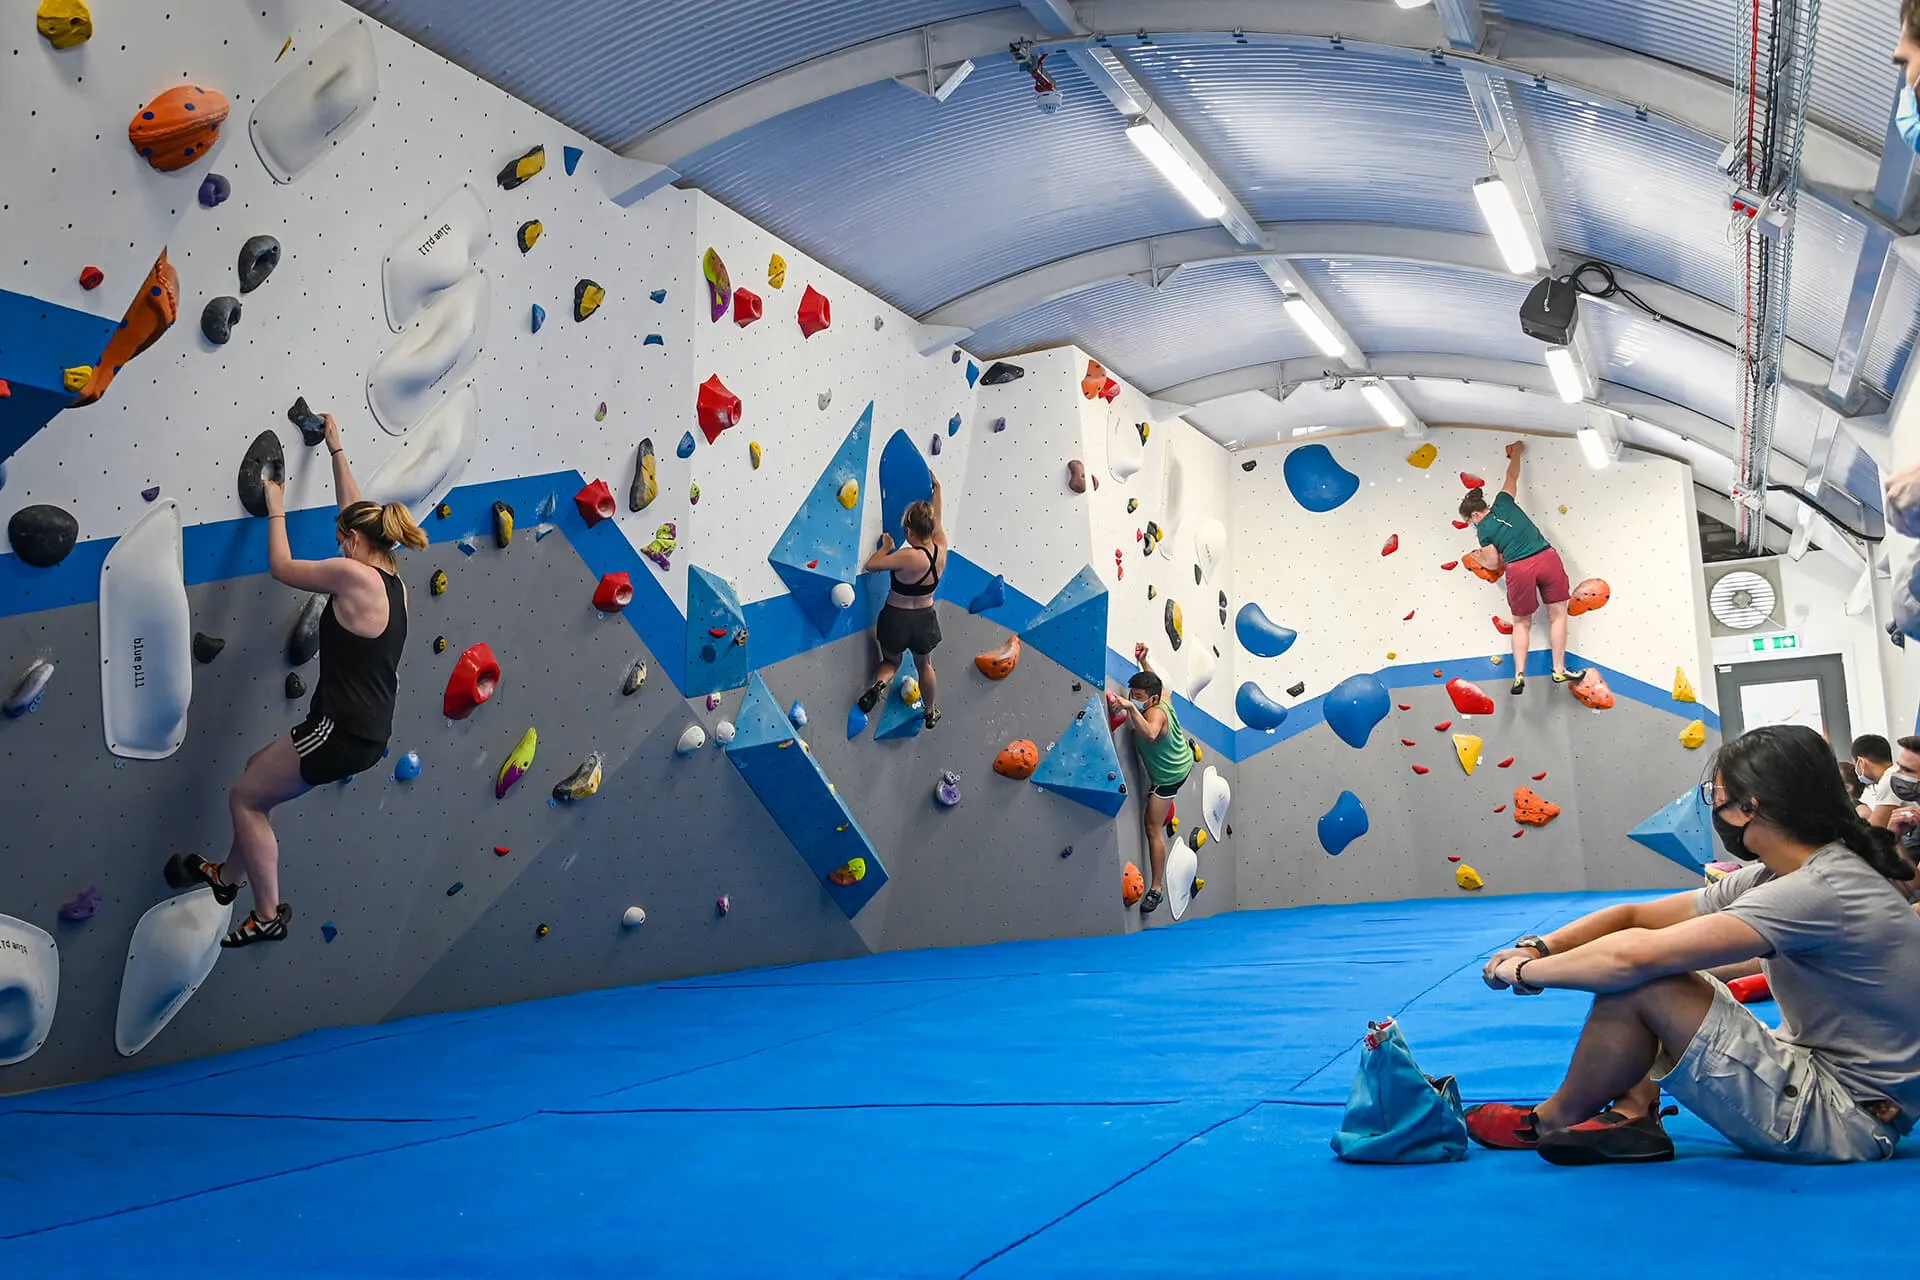 Four climbers move along a climbing wall. A black-haired person watches from the side-line.